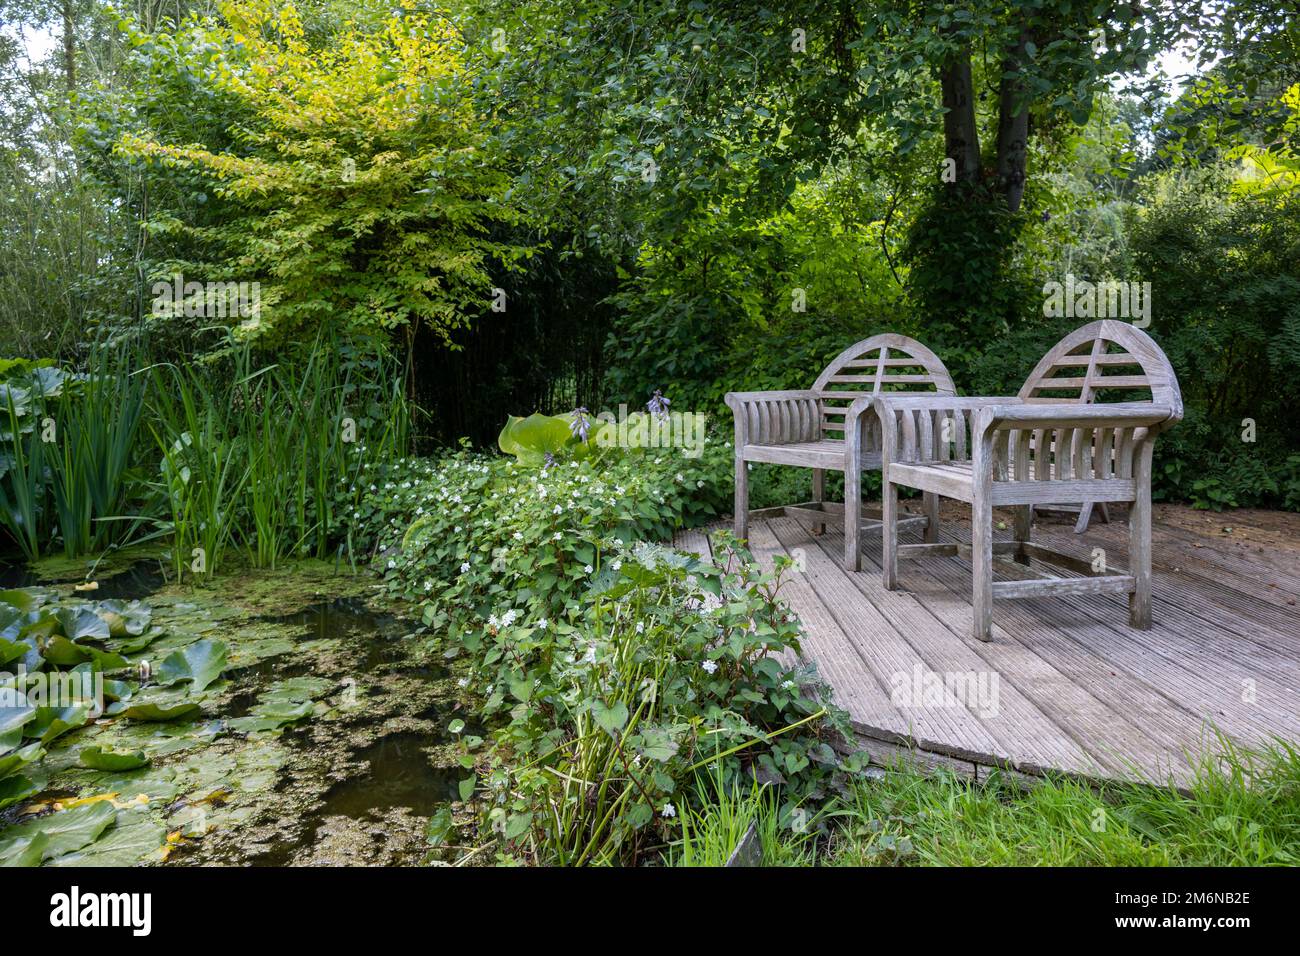 Enlgish green garden with water pound and multpiple type of trees and plants Stock Photo